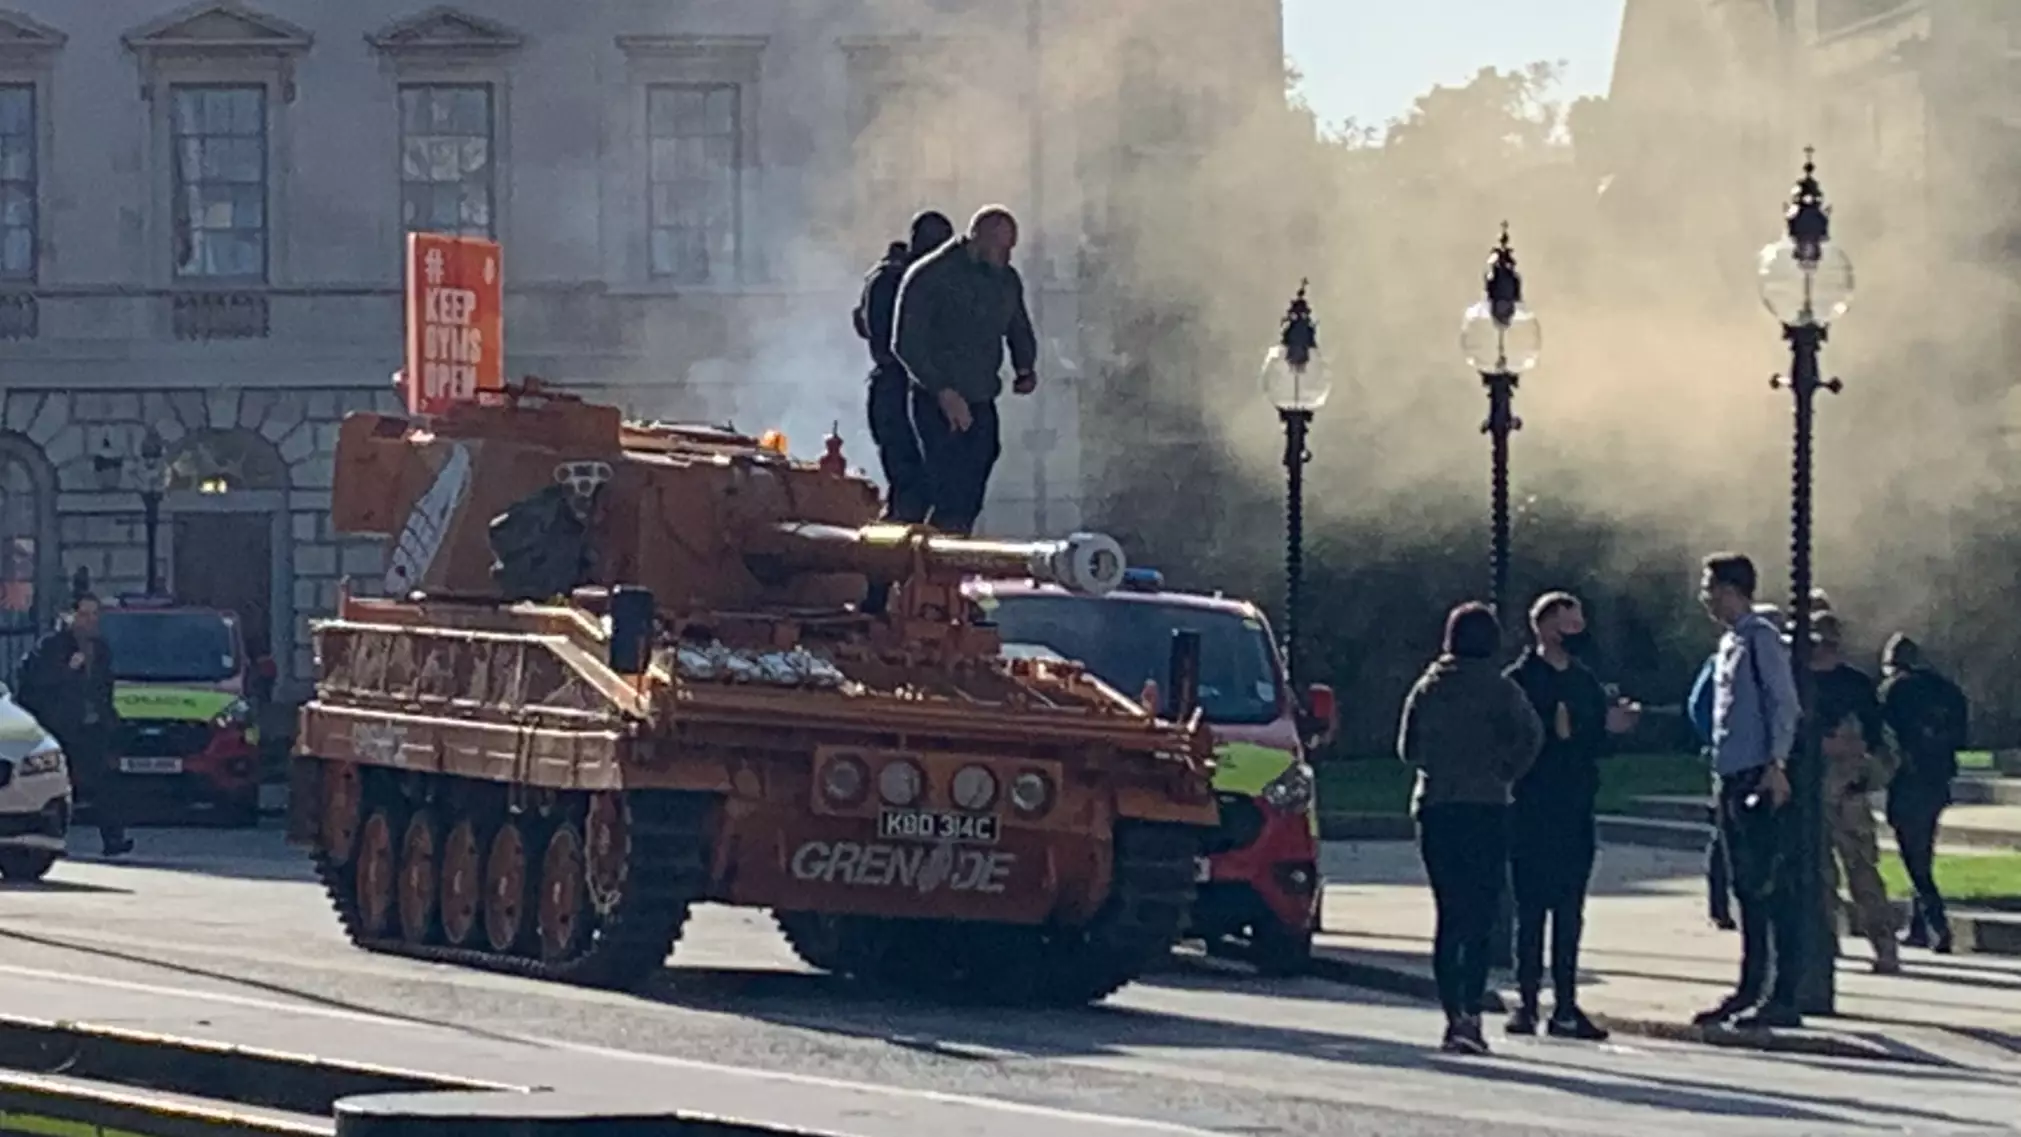 Protestors Bring Tank To Parliament In Campaign Against Lockdown Gym Closures